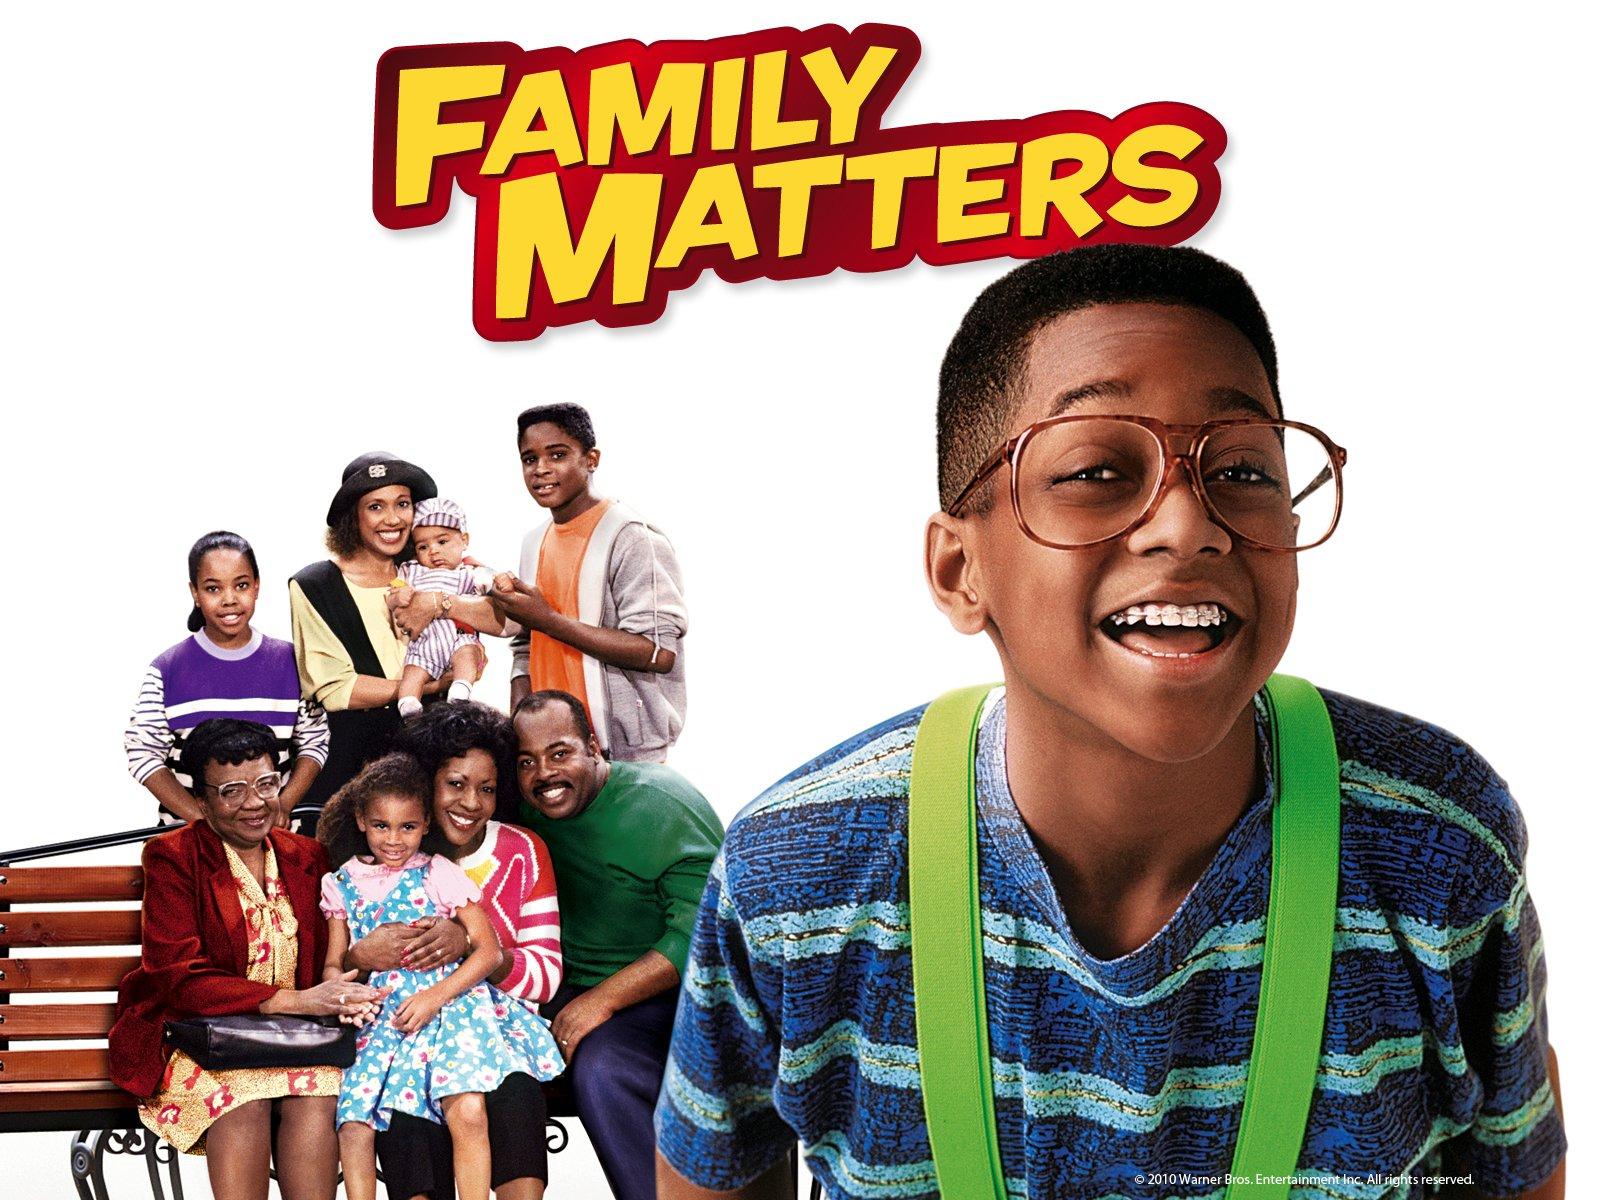 Family Matters: The Complete First Season. Prime